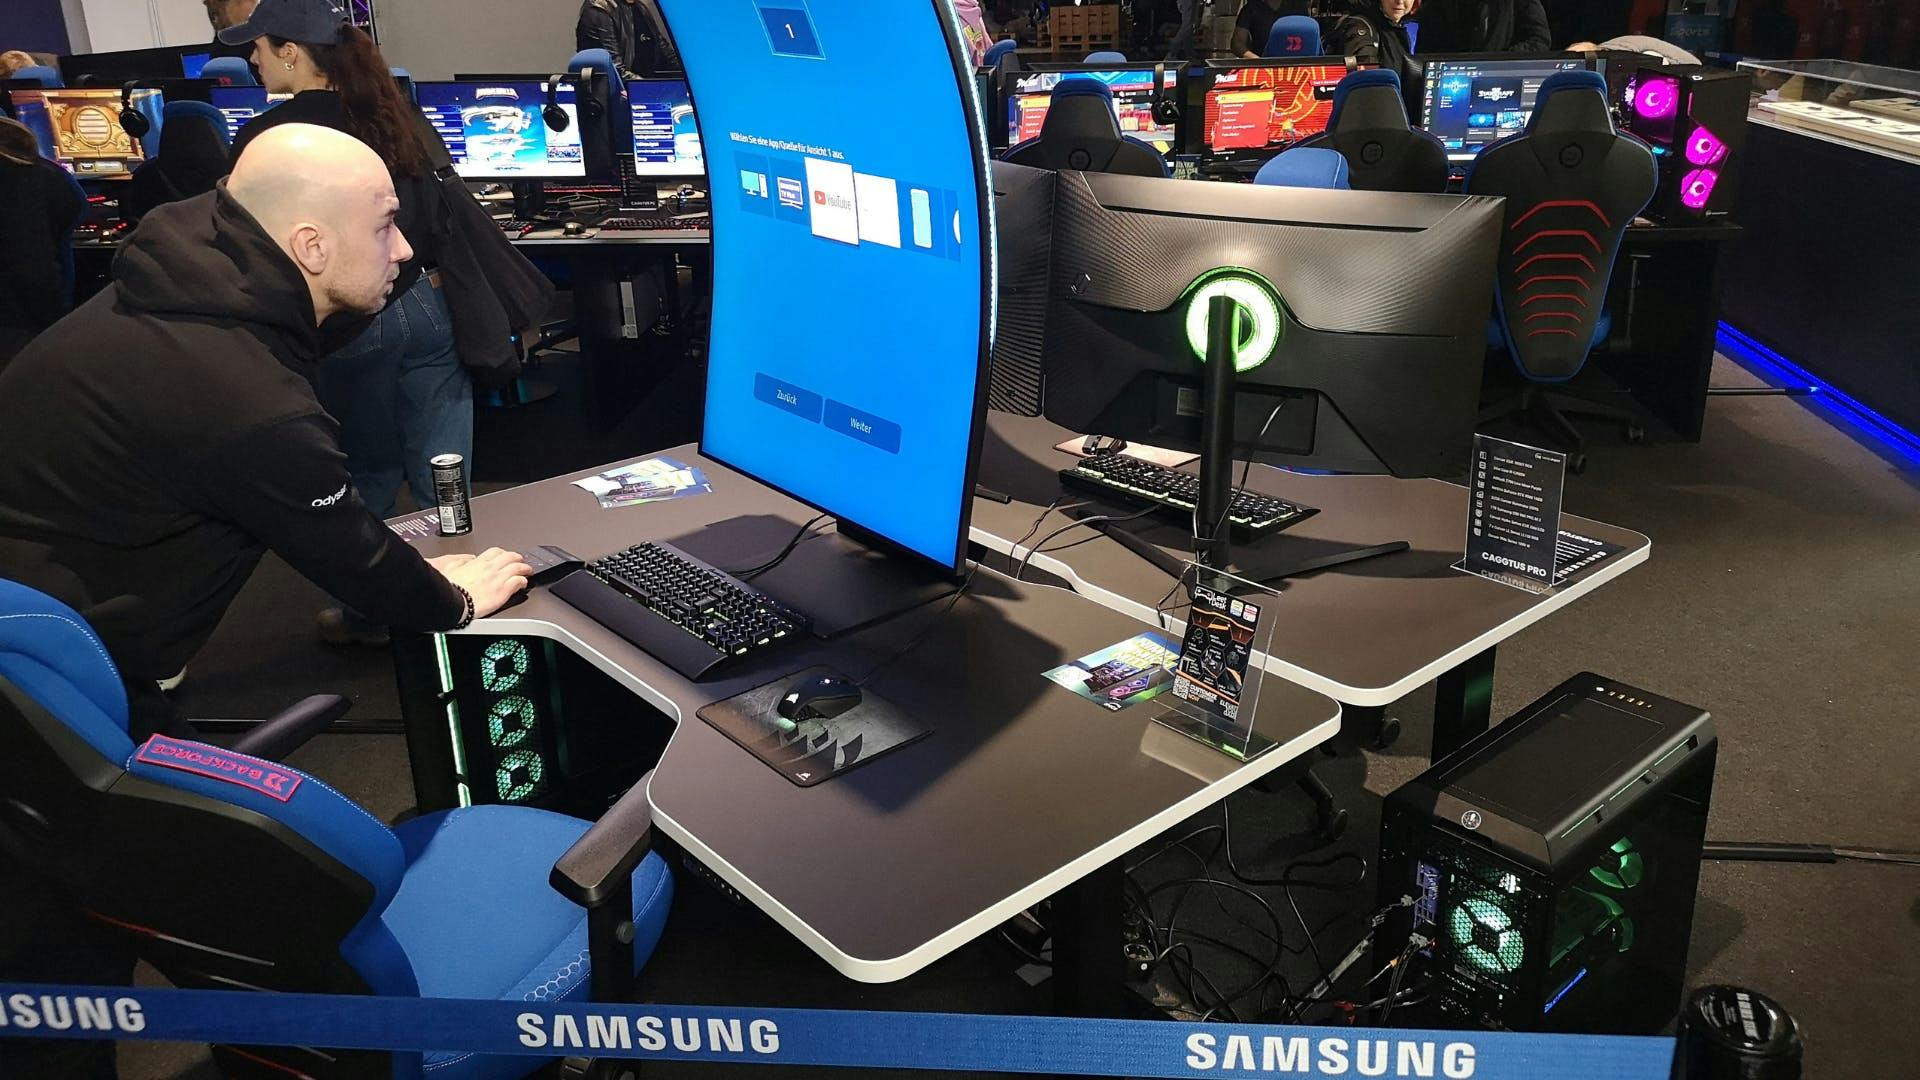 LeetDesk Gaming desks coupled Samsung monitors is a winning combo - Location Caggtus in Leipzig